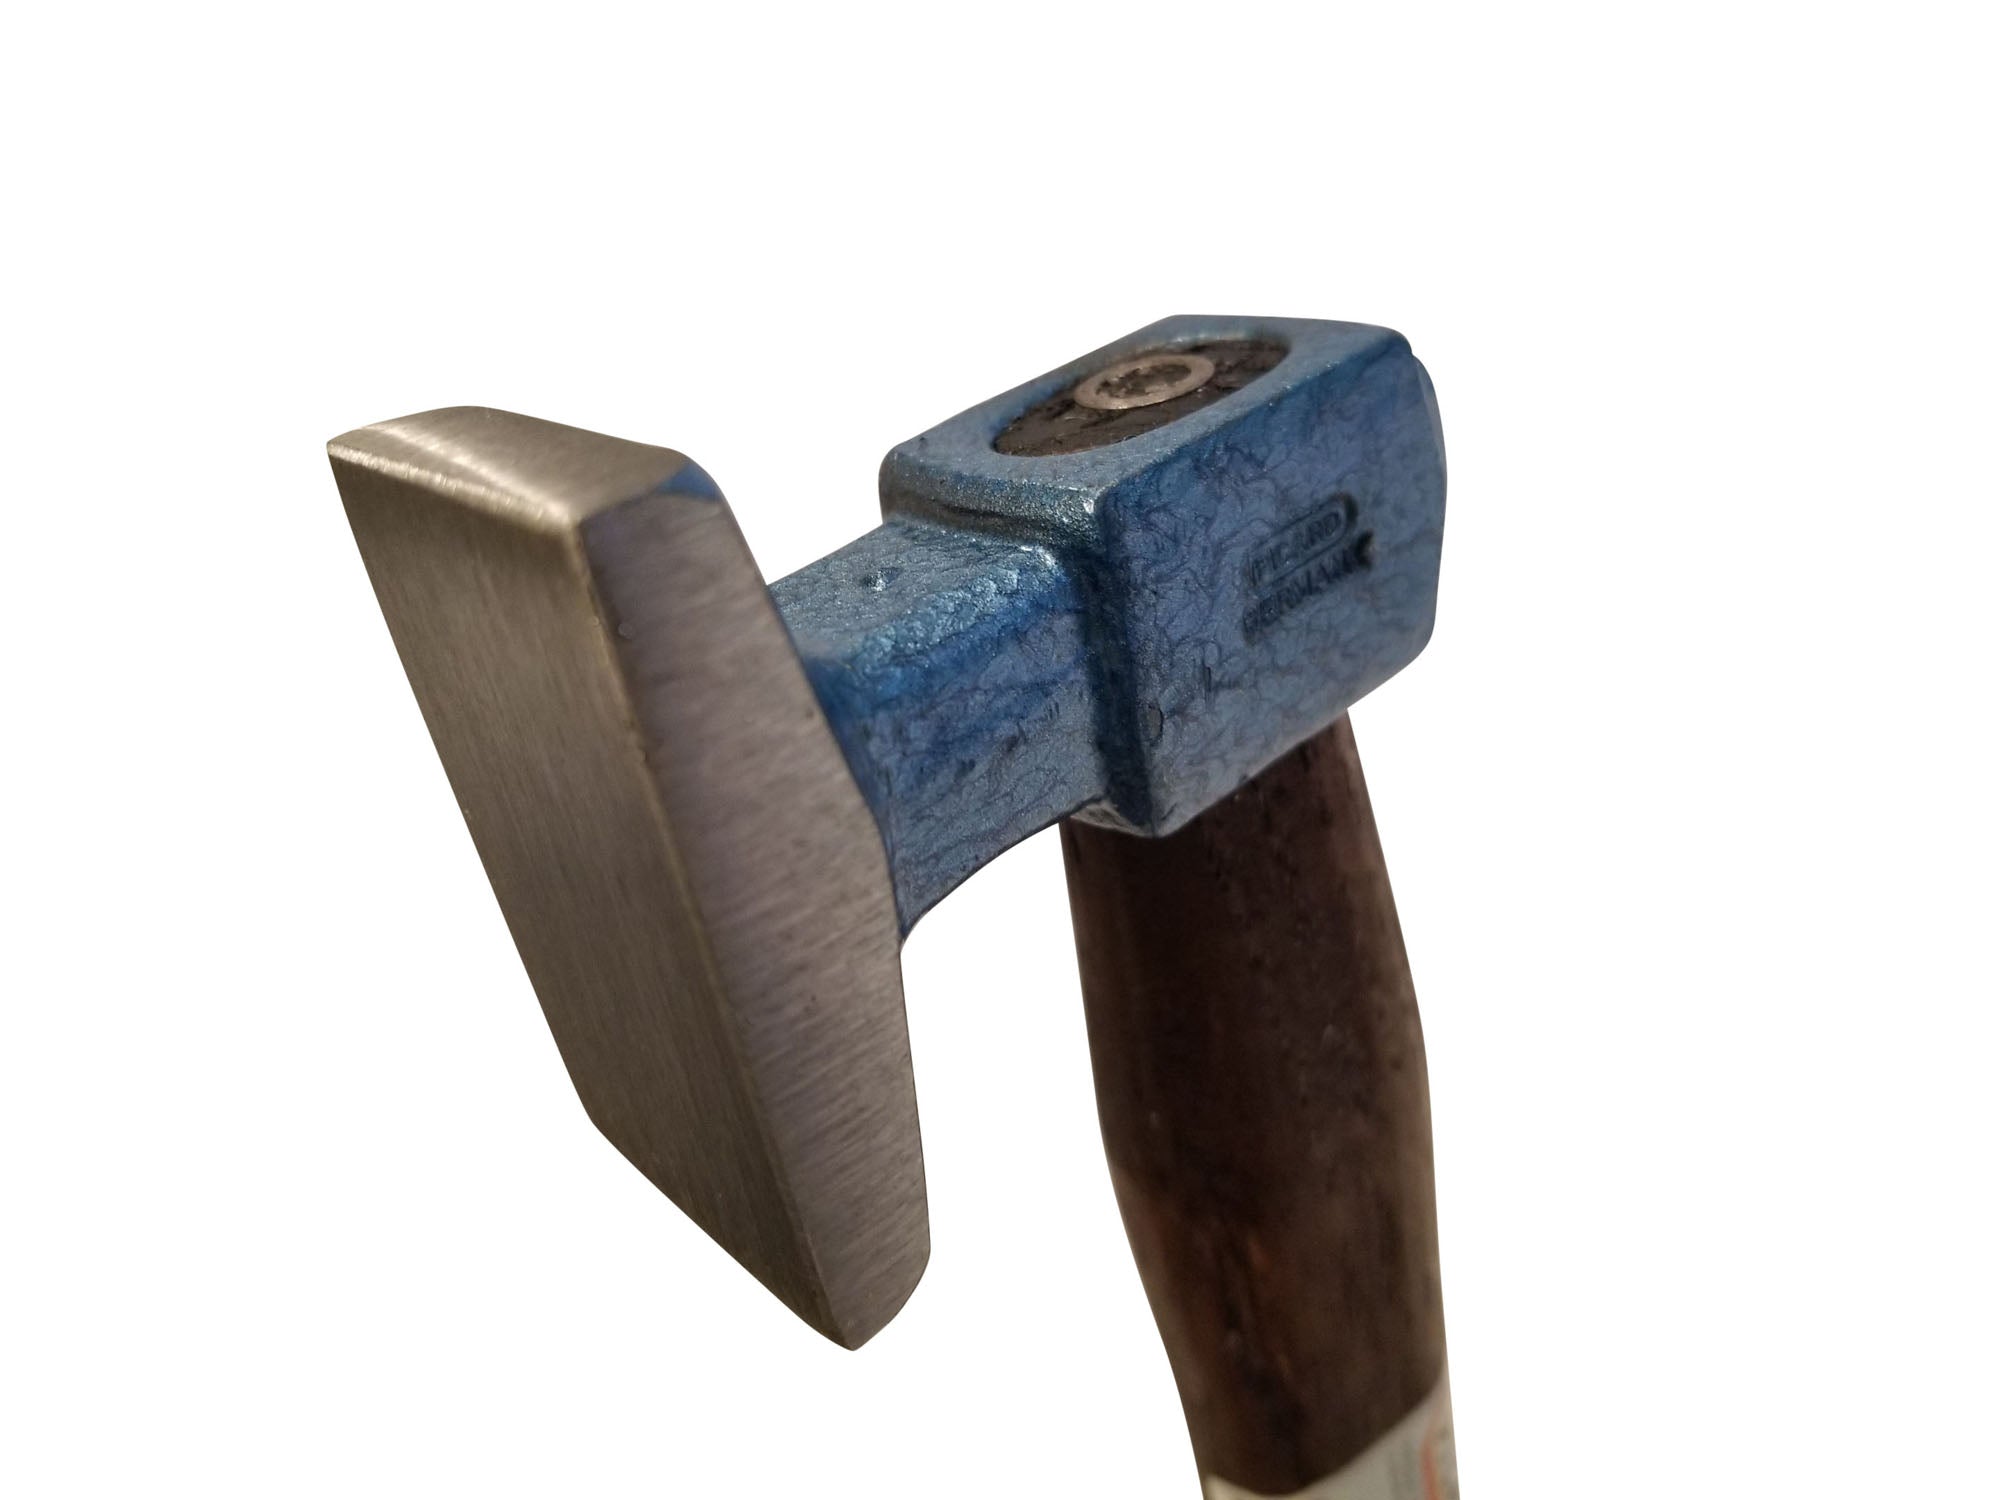 Picard 2525402 Single Flat Smooth Face Bumping Hammer - Hanks Hammers